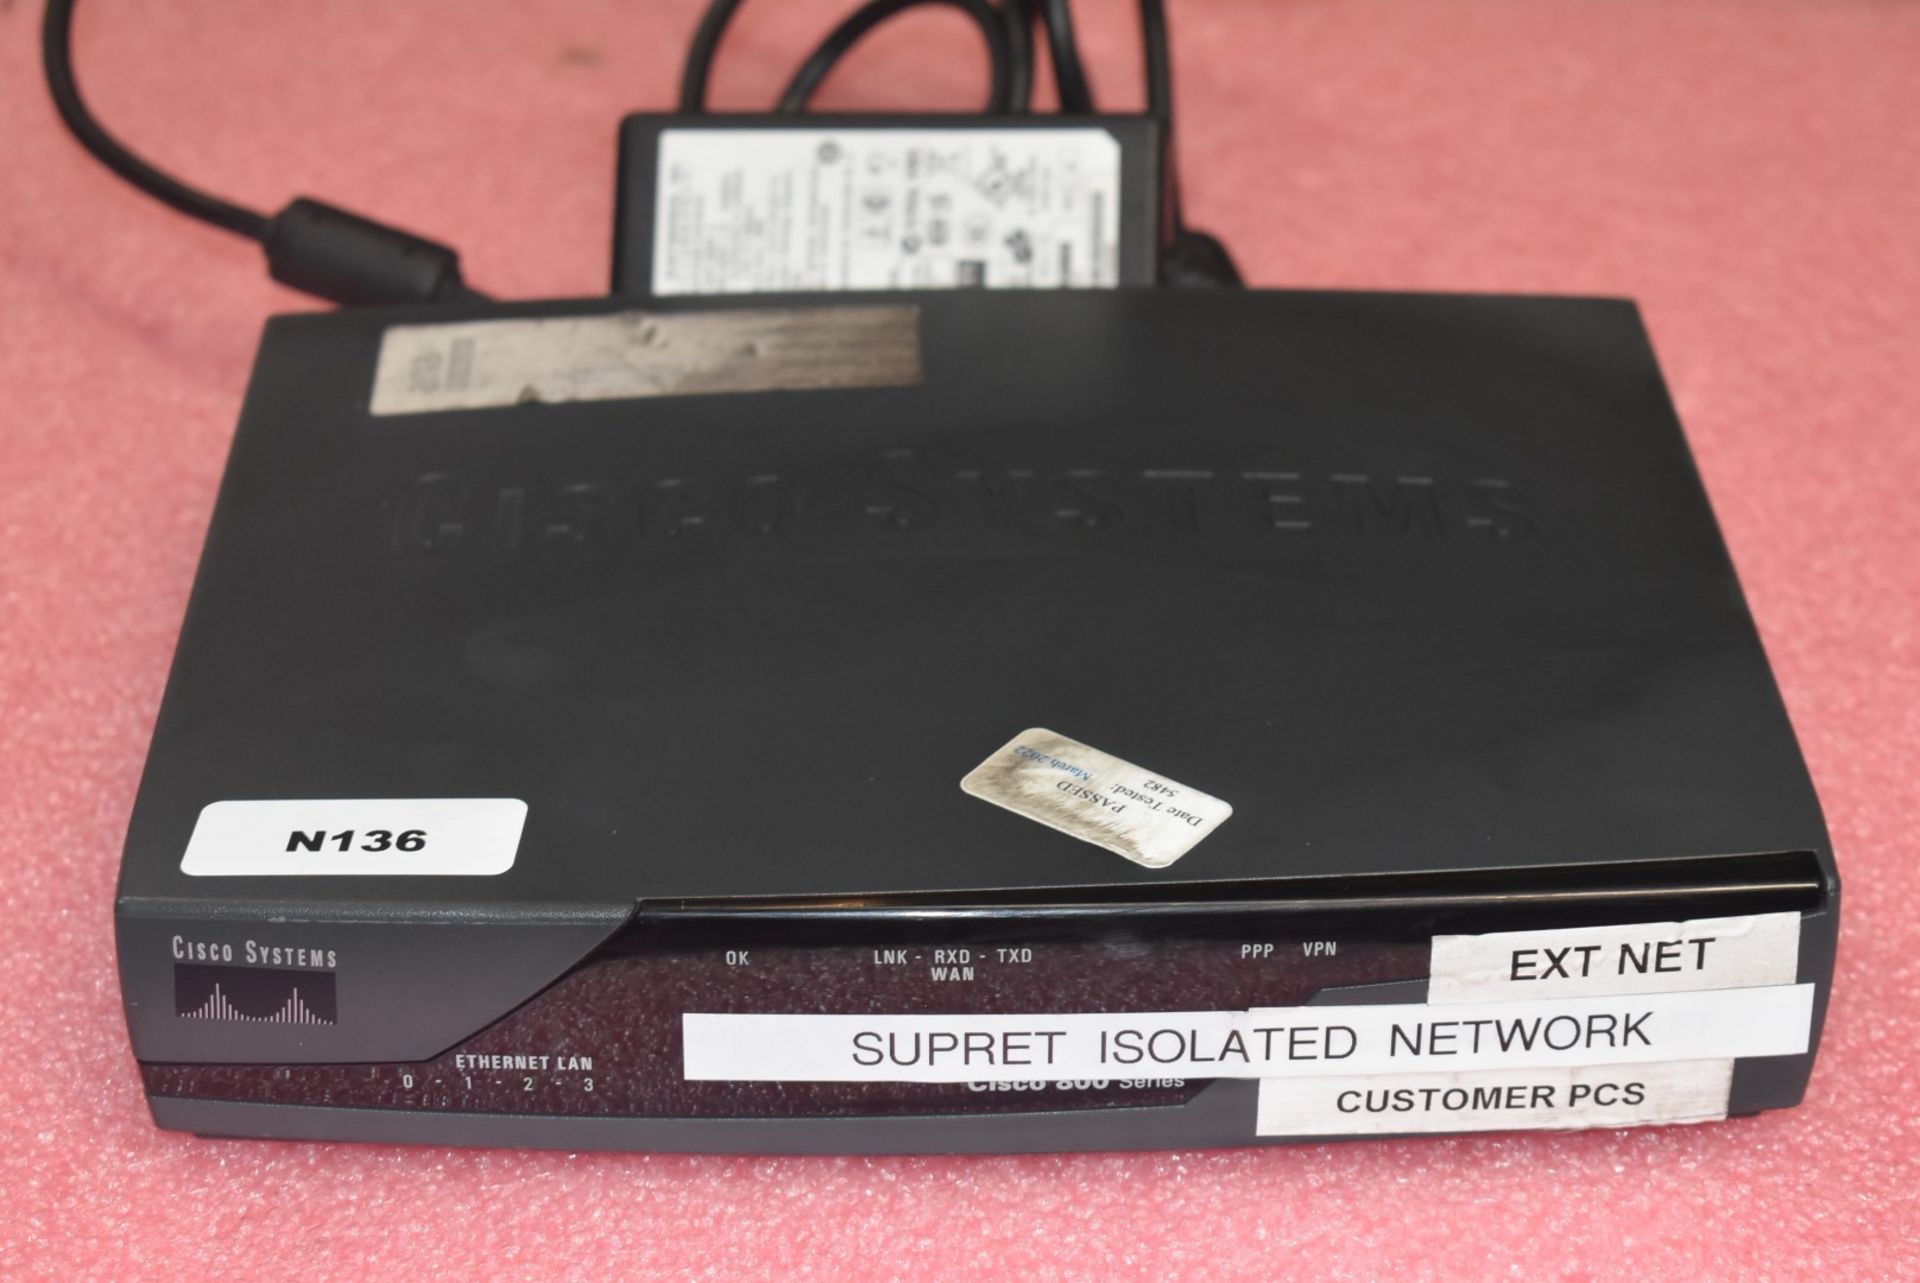 1 x Cisco 850 Series Cisco 857 Integrated Service Router - Includes Power Adaptor - Image 2 of 3